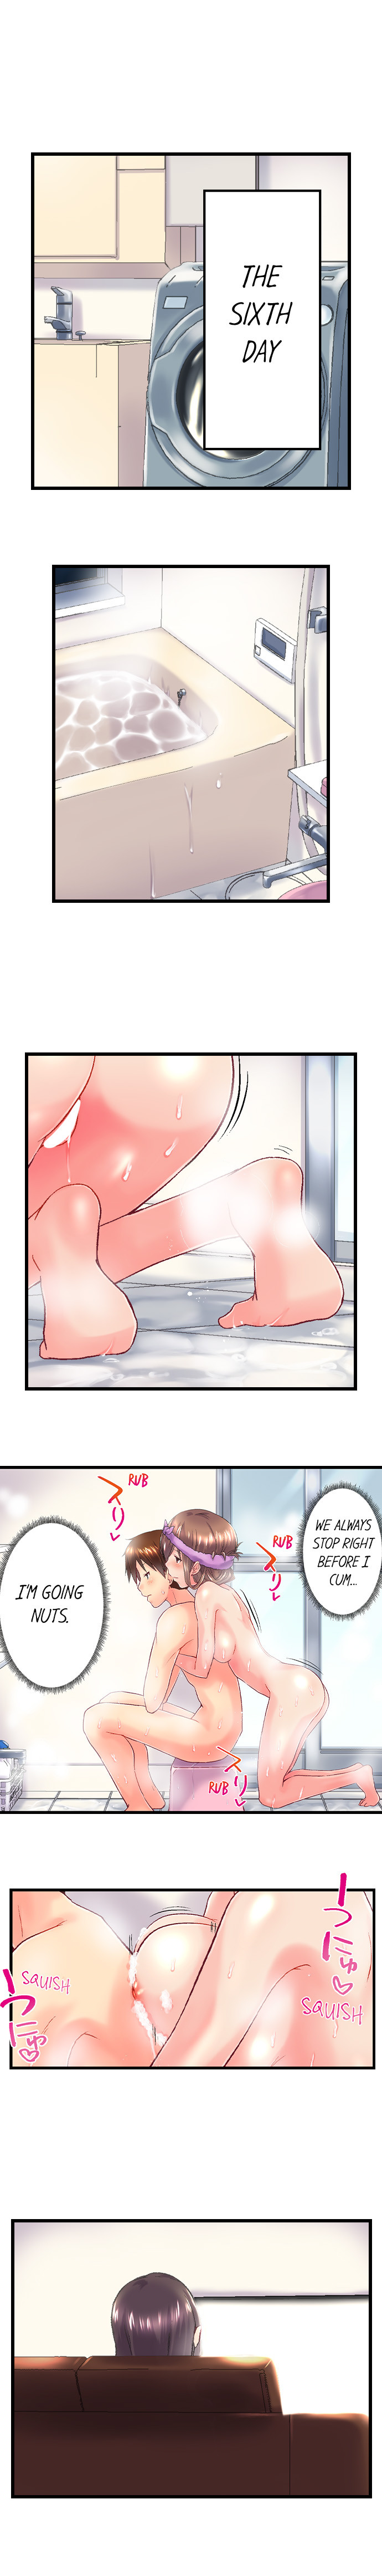 My Brother’s Slipped Inside Me in The Bathtub - Chapter 107 Page 9